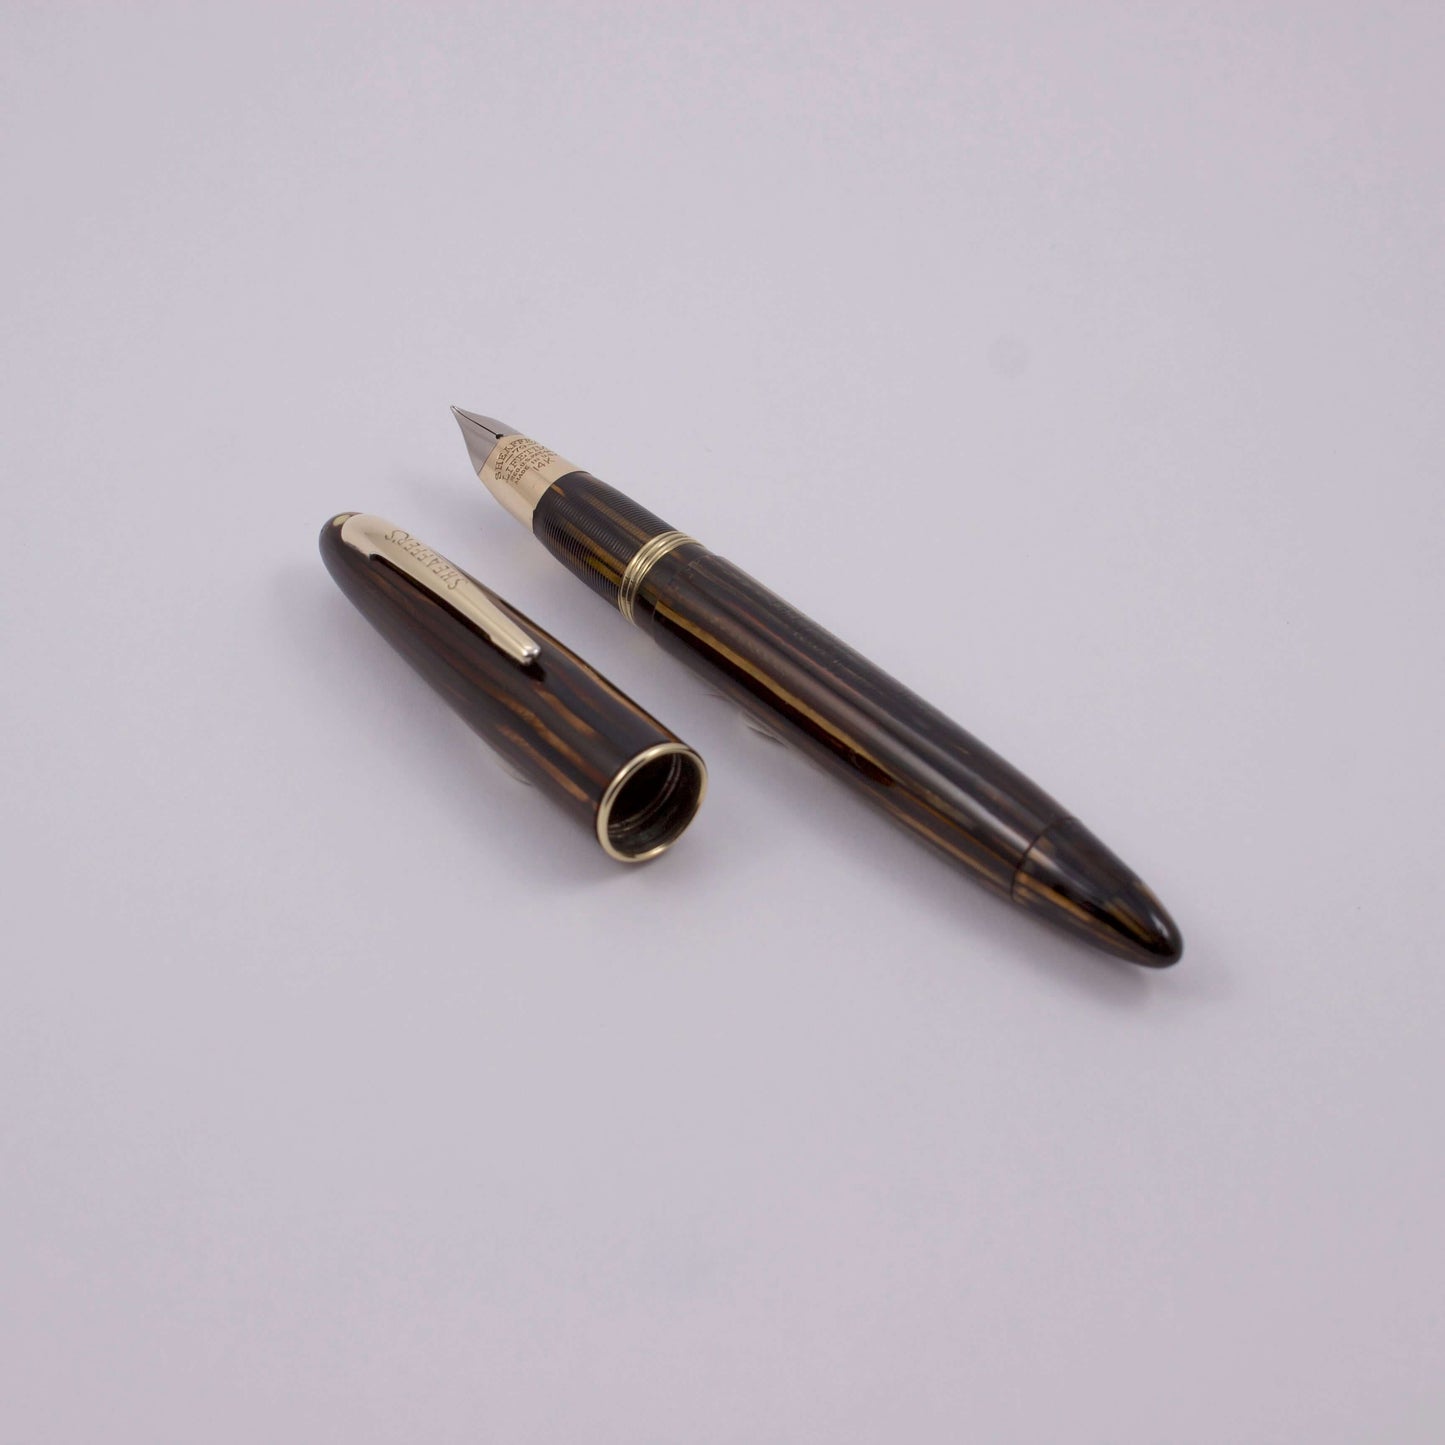 Sheaffer Vac-Fil, Brown Striated with a 14K Gold Two-tone Fine Nib, White Dot, Lifetime Product Name: Sheaffer Triumph Sovereign II Fountain Pen Manufacture Year: Mid 1940's Length: 4 7/8 Filling System: Vac-Fil, restored to working condition with new sea